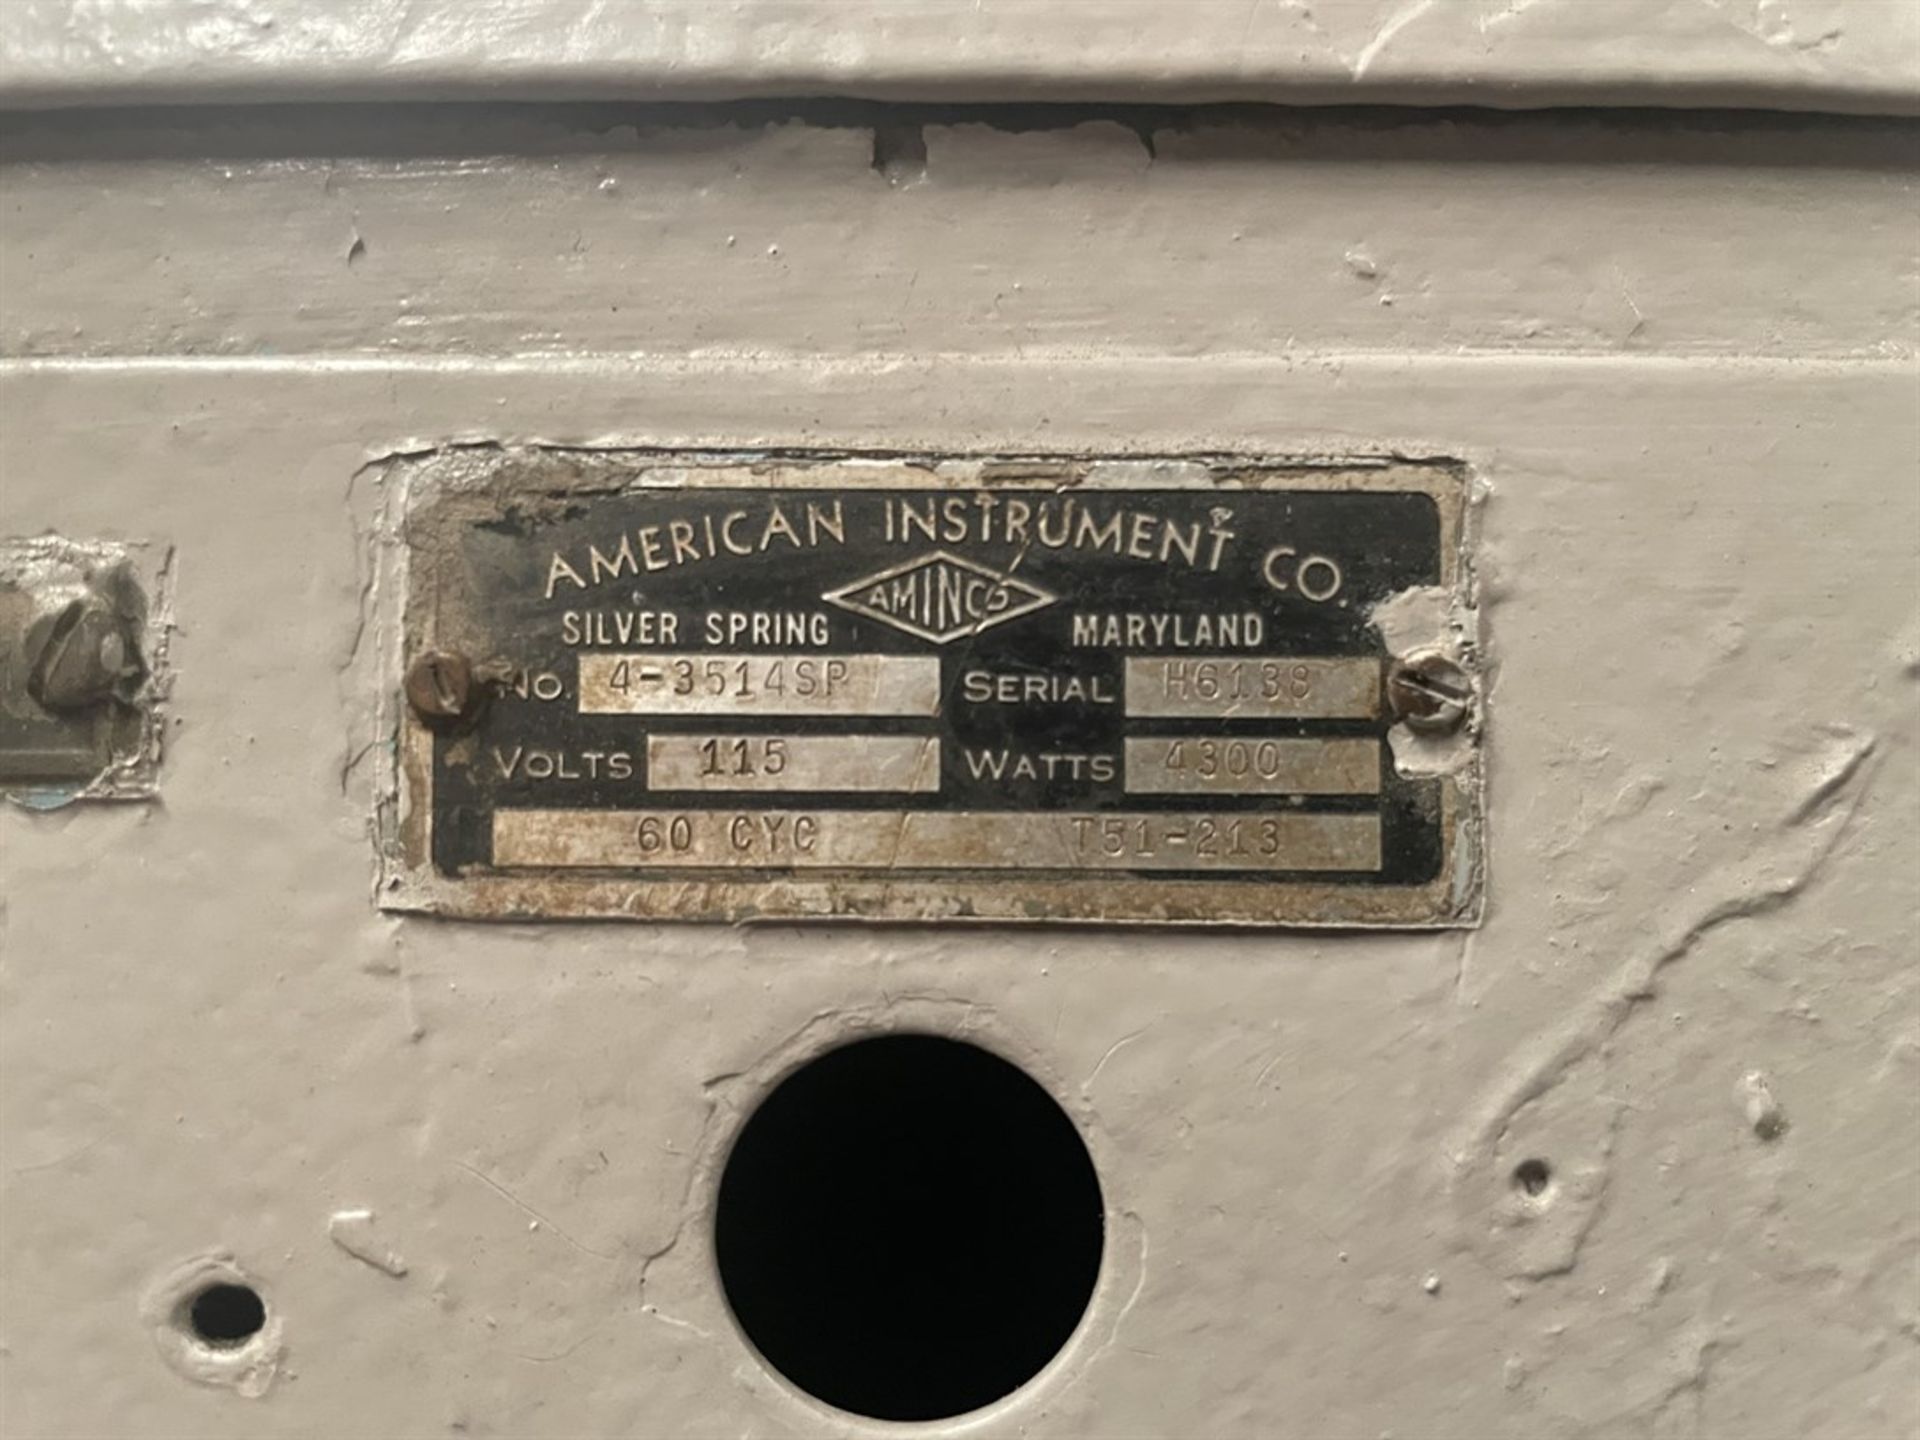 AMERICAN INSTRUMENT COMPANY 4-3514SP Oven, s/n H6138 - Image 3 of 3